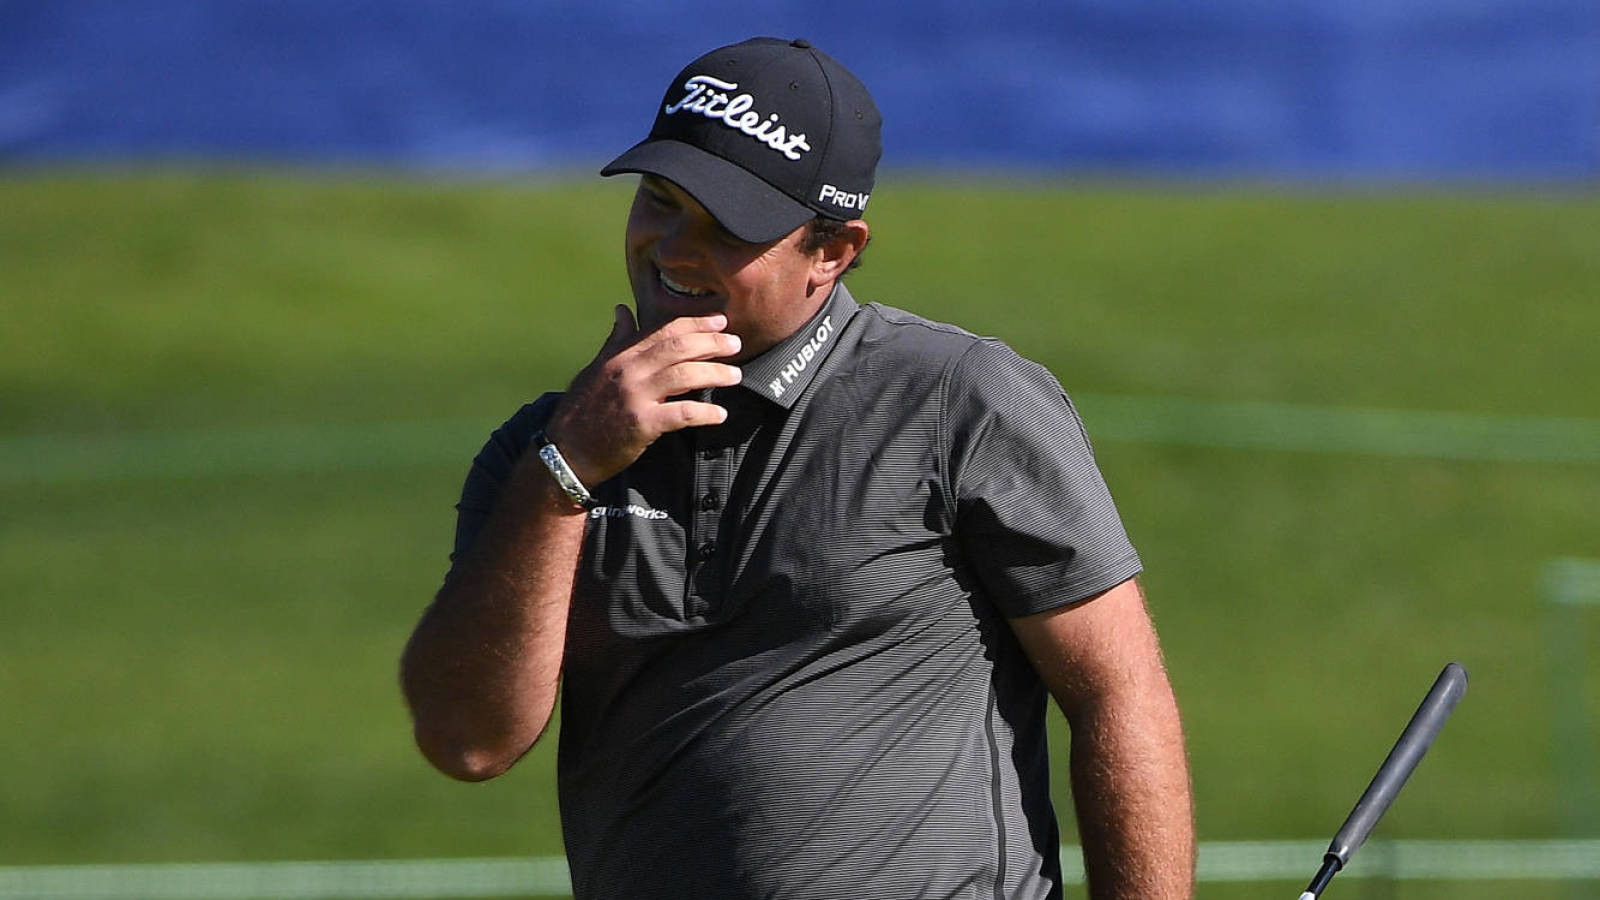 Co-leader Patrick Reed in the dispute for rules once again at the PGA Tour event